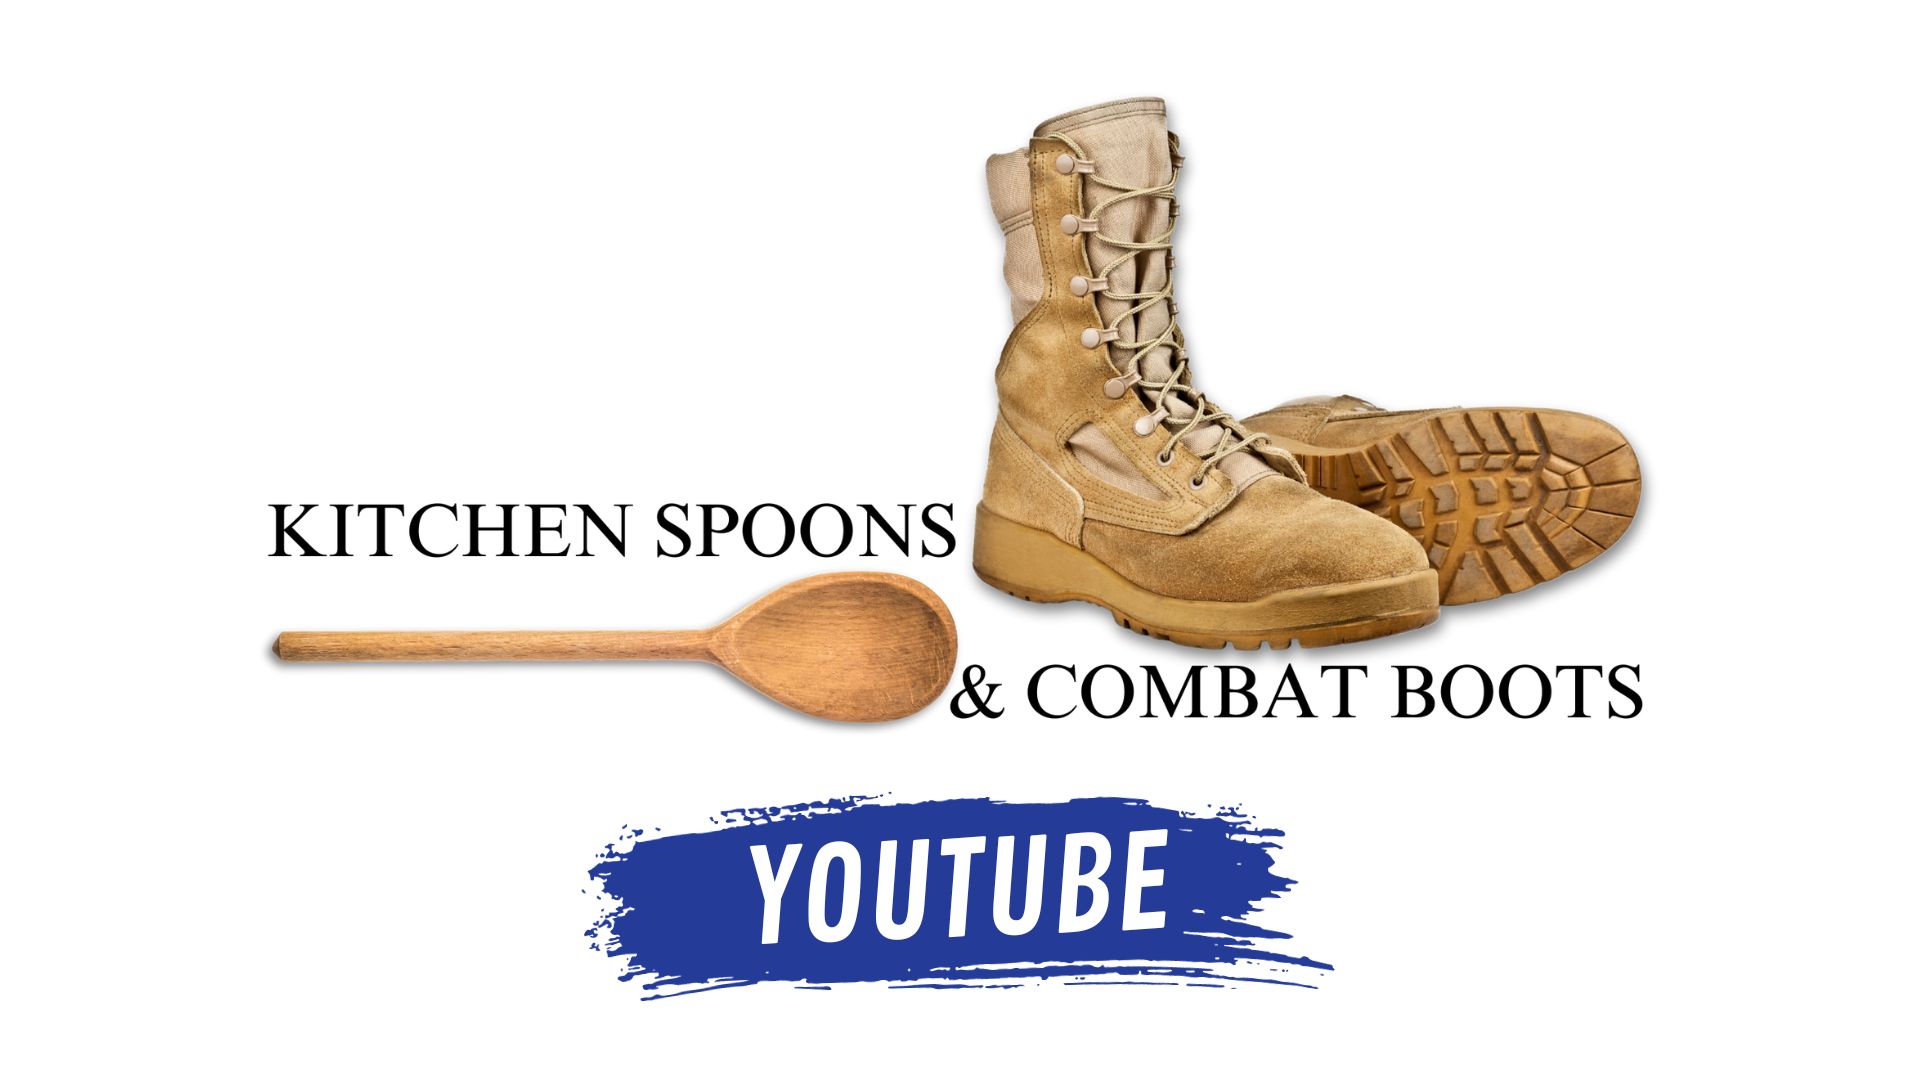 kitchen spoons & combat boots youtube